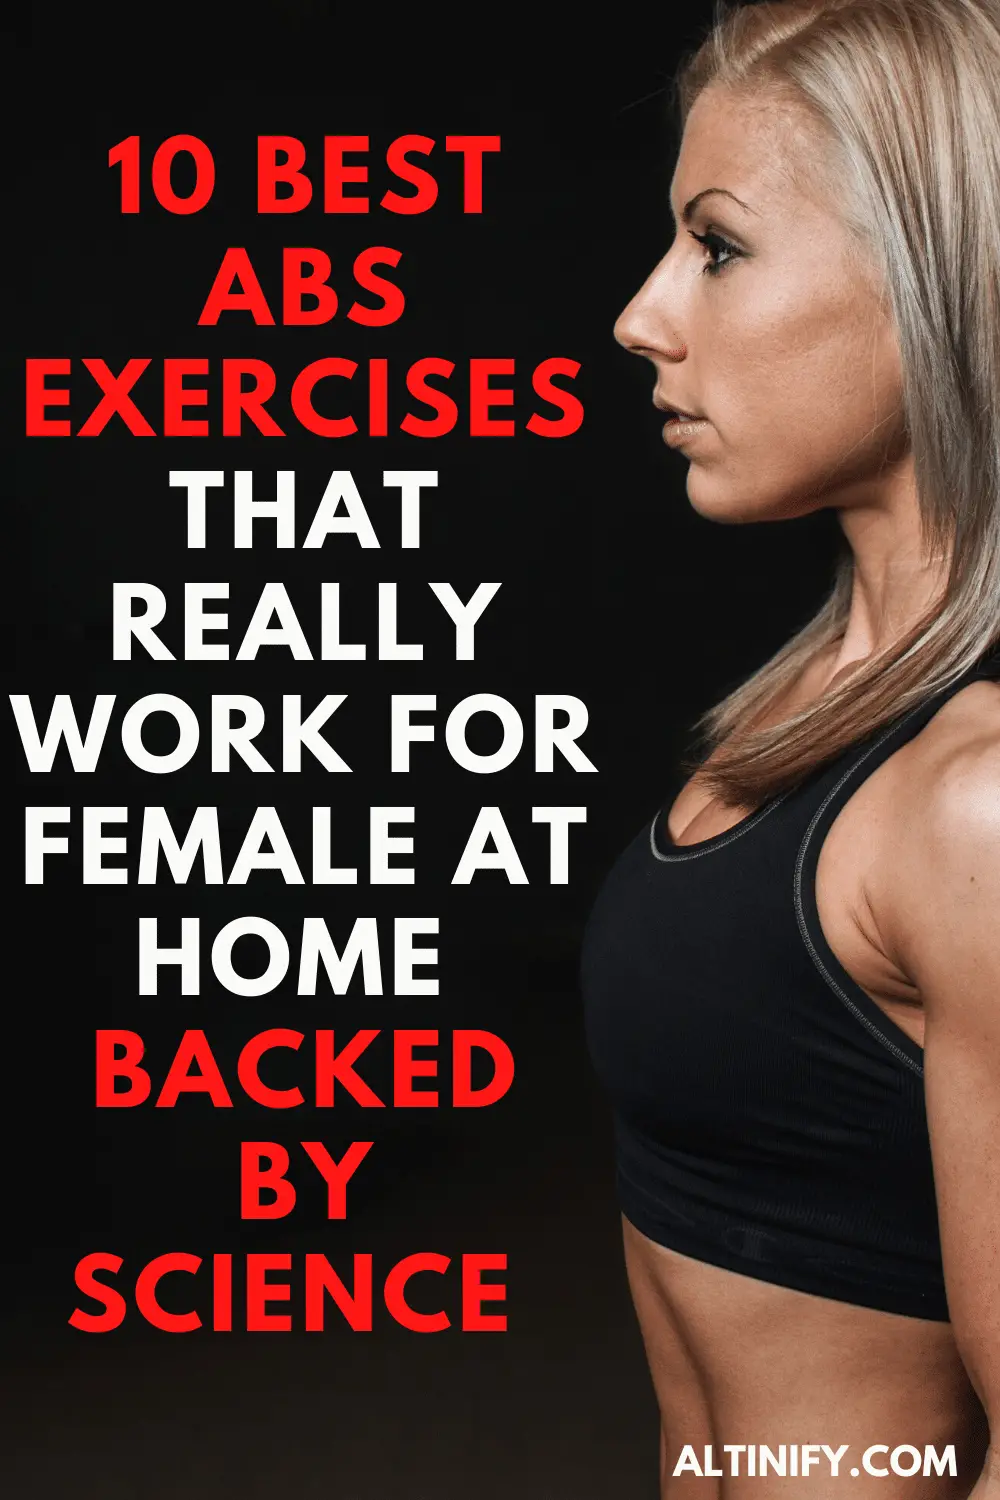 10 Best Abs Exercises That Really Work for Female at Home [With Videos]